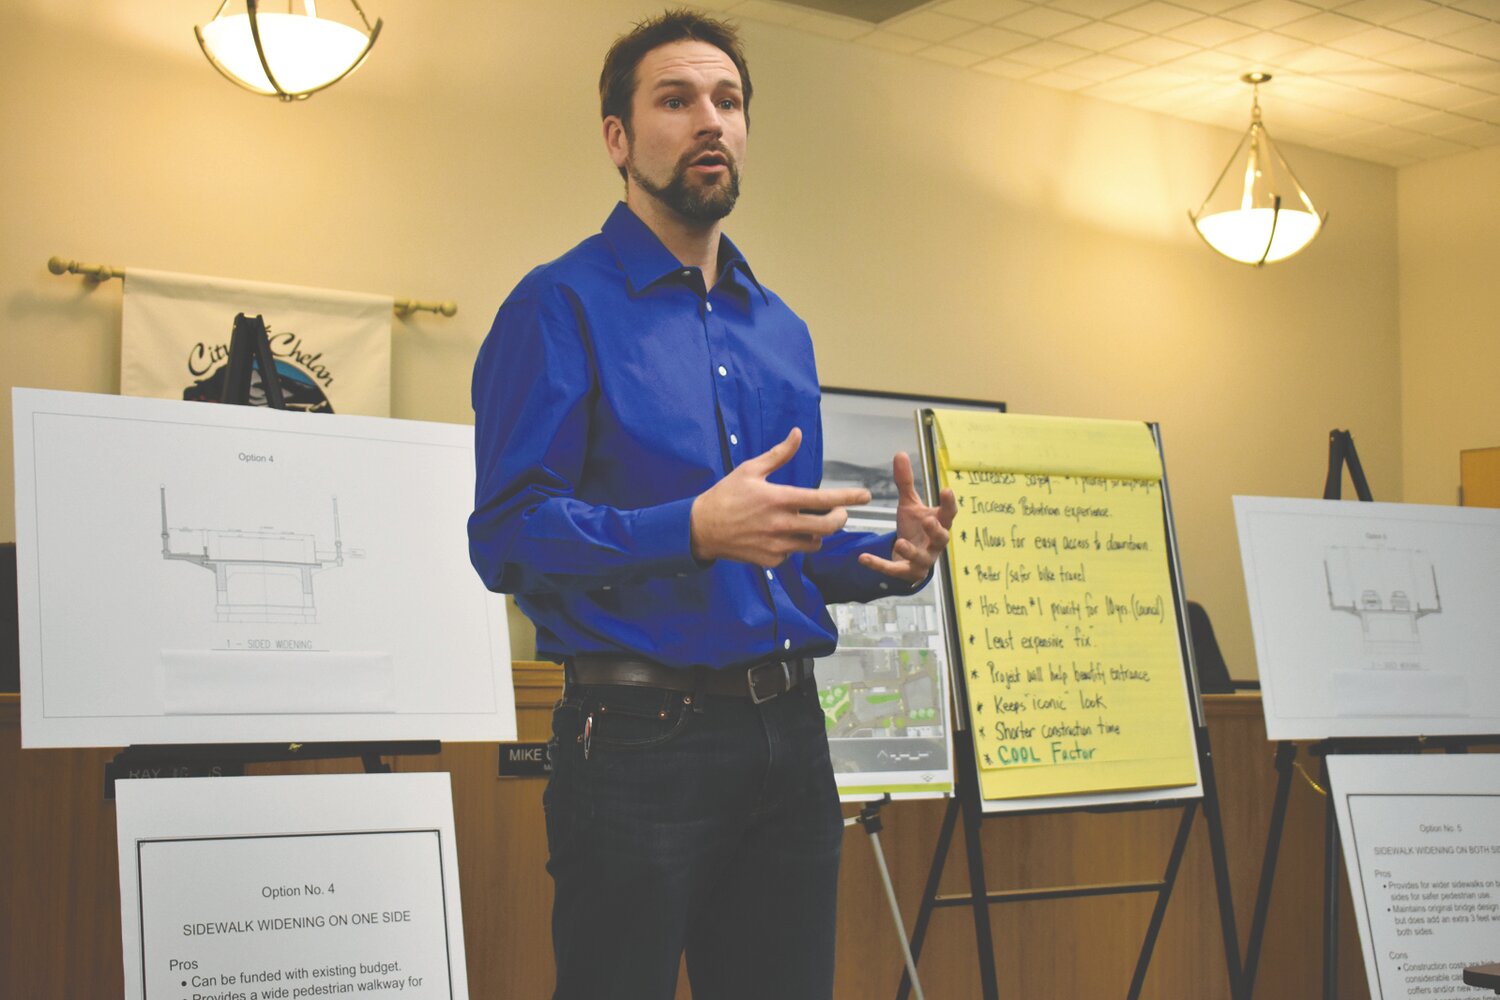 SCJ Alliance Engineer, Dan Ireland gave the specifics of proposed plan and showed some of the elements they are looking at adding to help traffic and pedestrians.